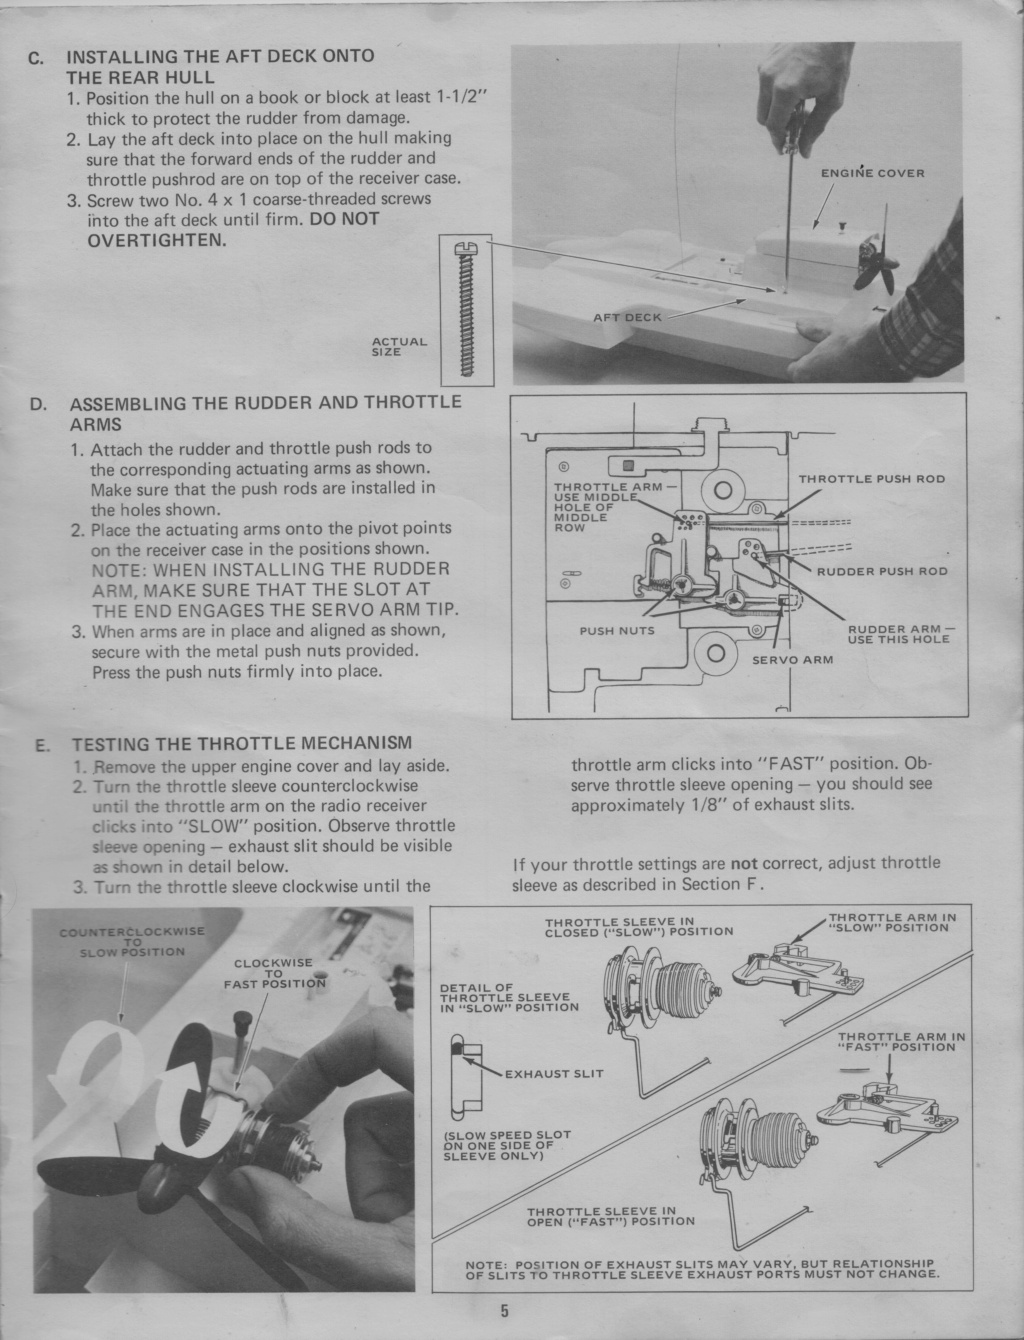 Hydro Blaster pictures and manual scans . Hydro_14